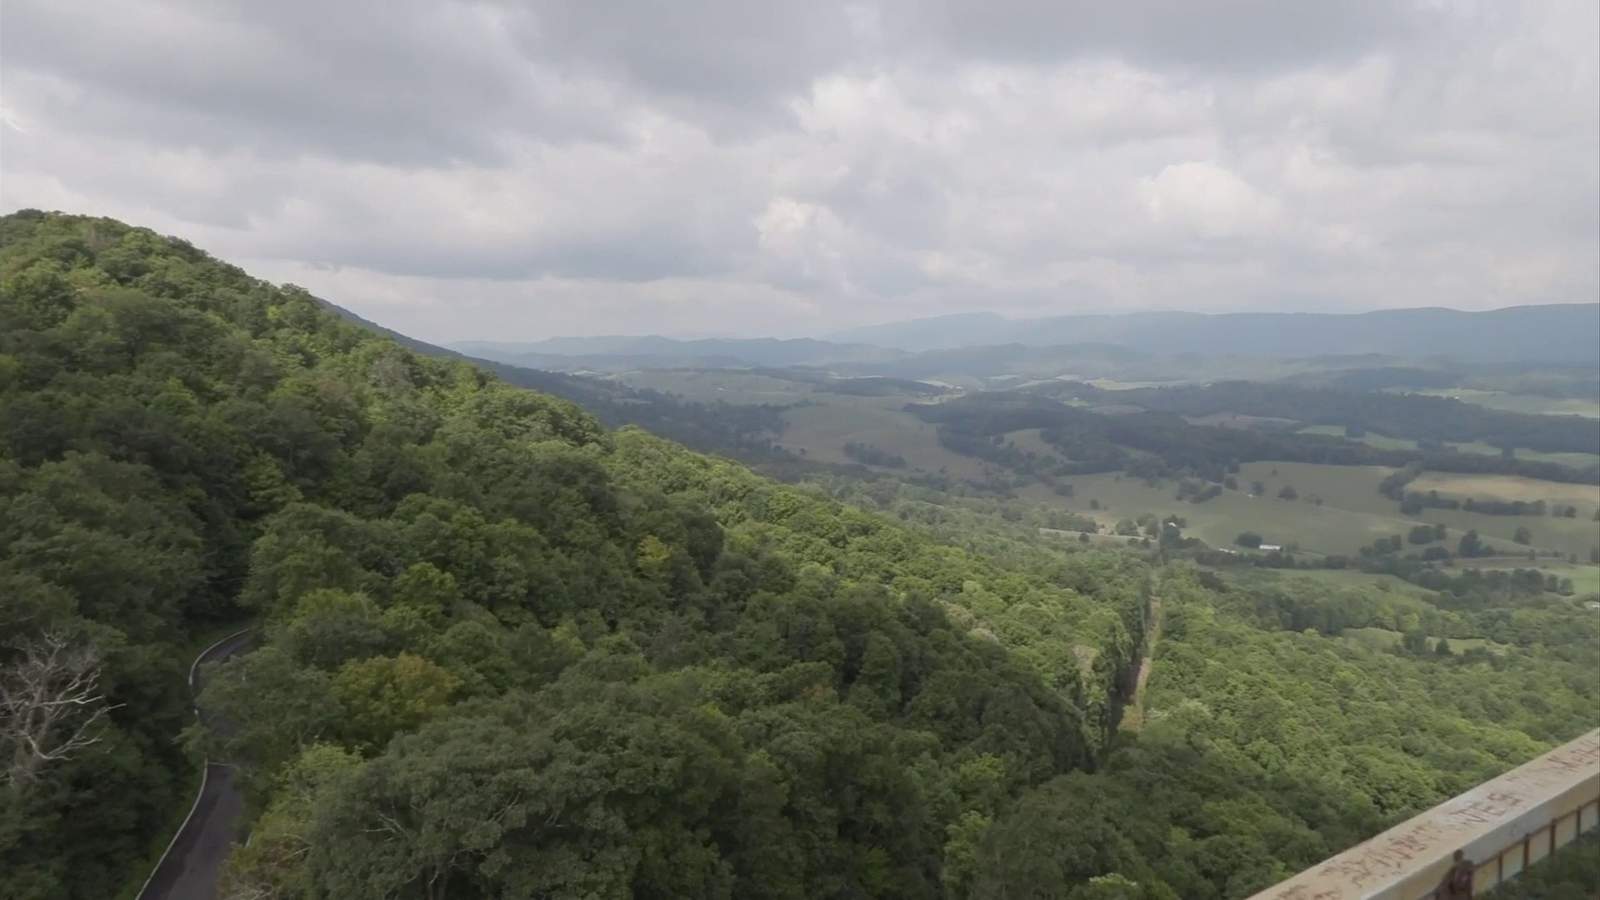 Check out these incredible views, places to visit in Wytheville